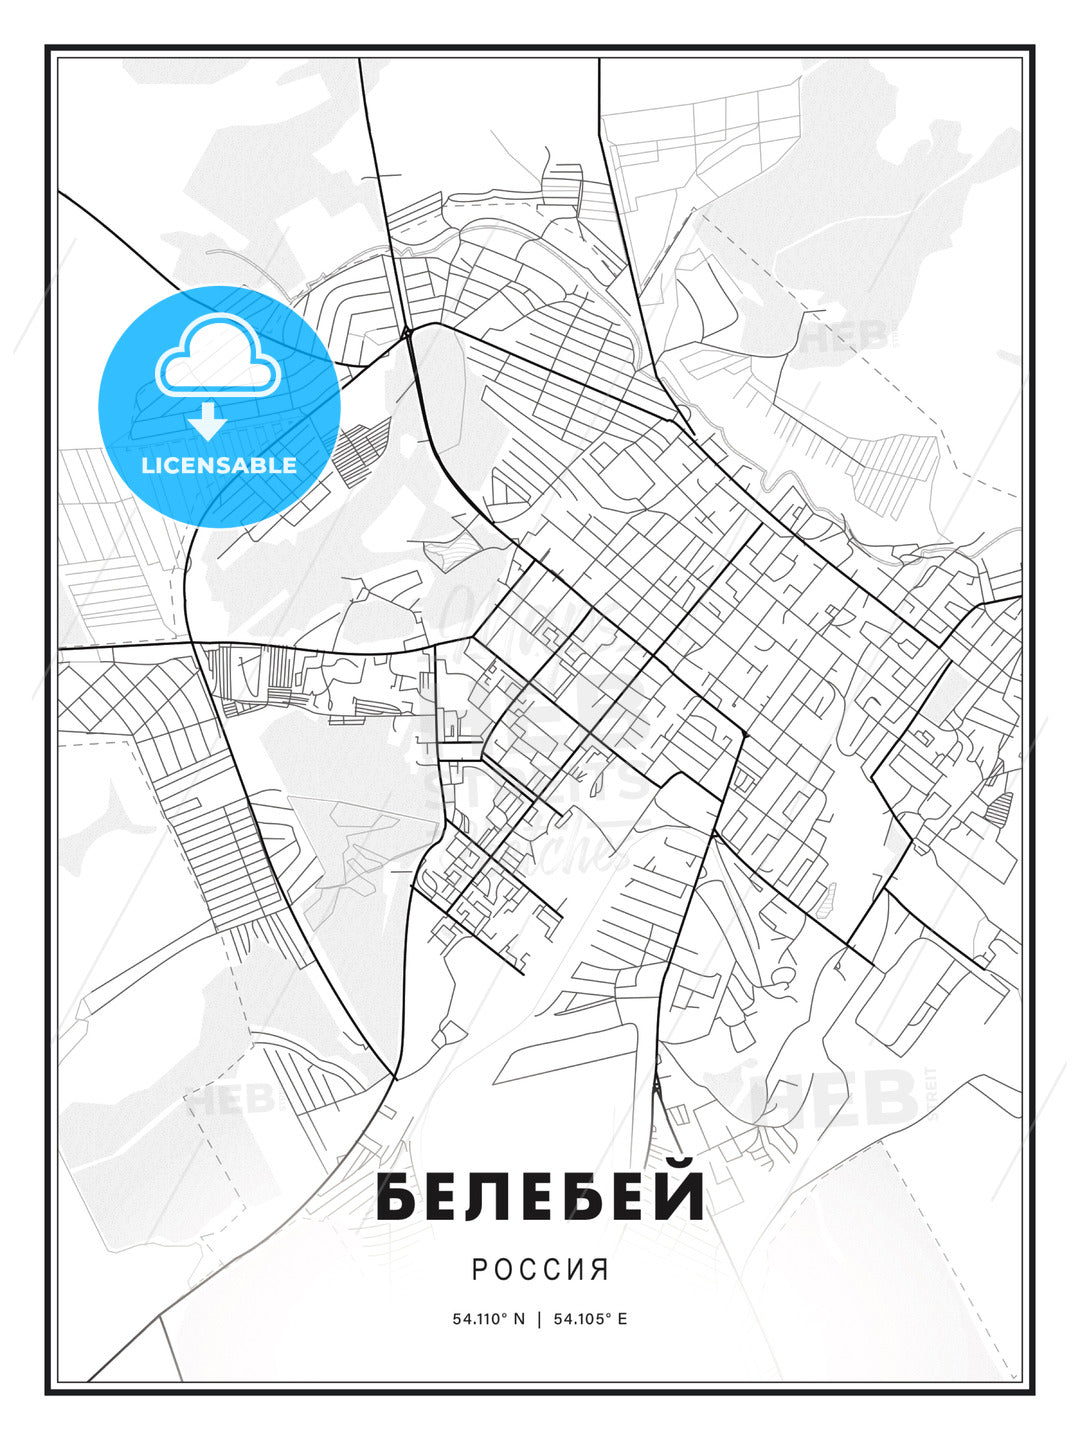 БЕЛЕБЕЙ / Belebey, Russia, Modern Print Template in Various Formats - HEBSTREITS Sketches